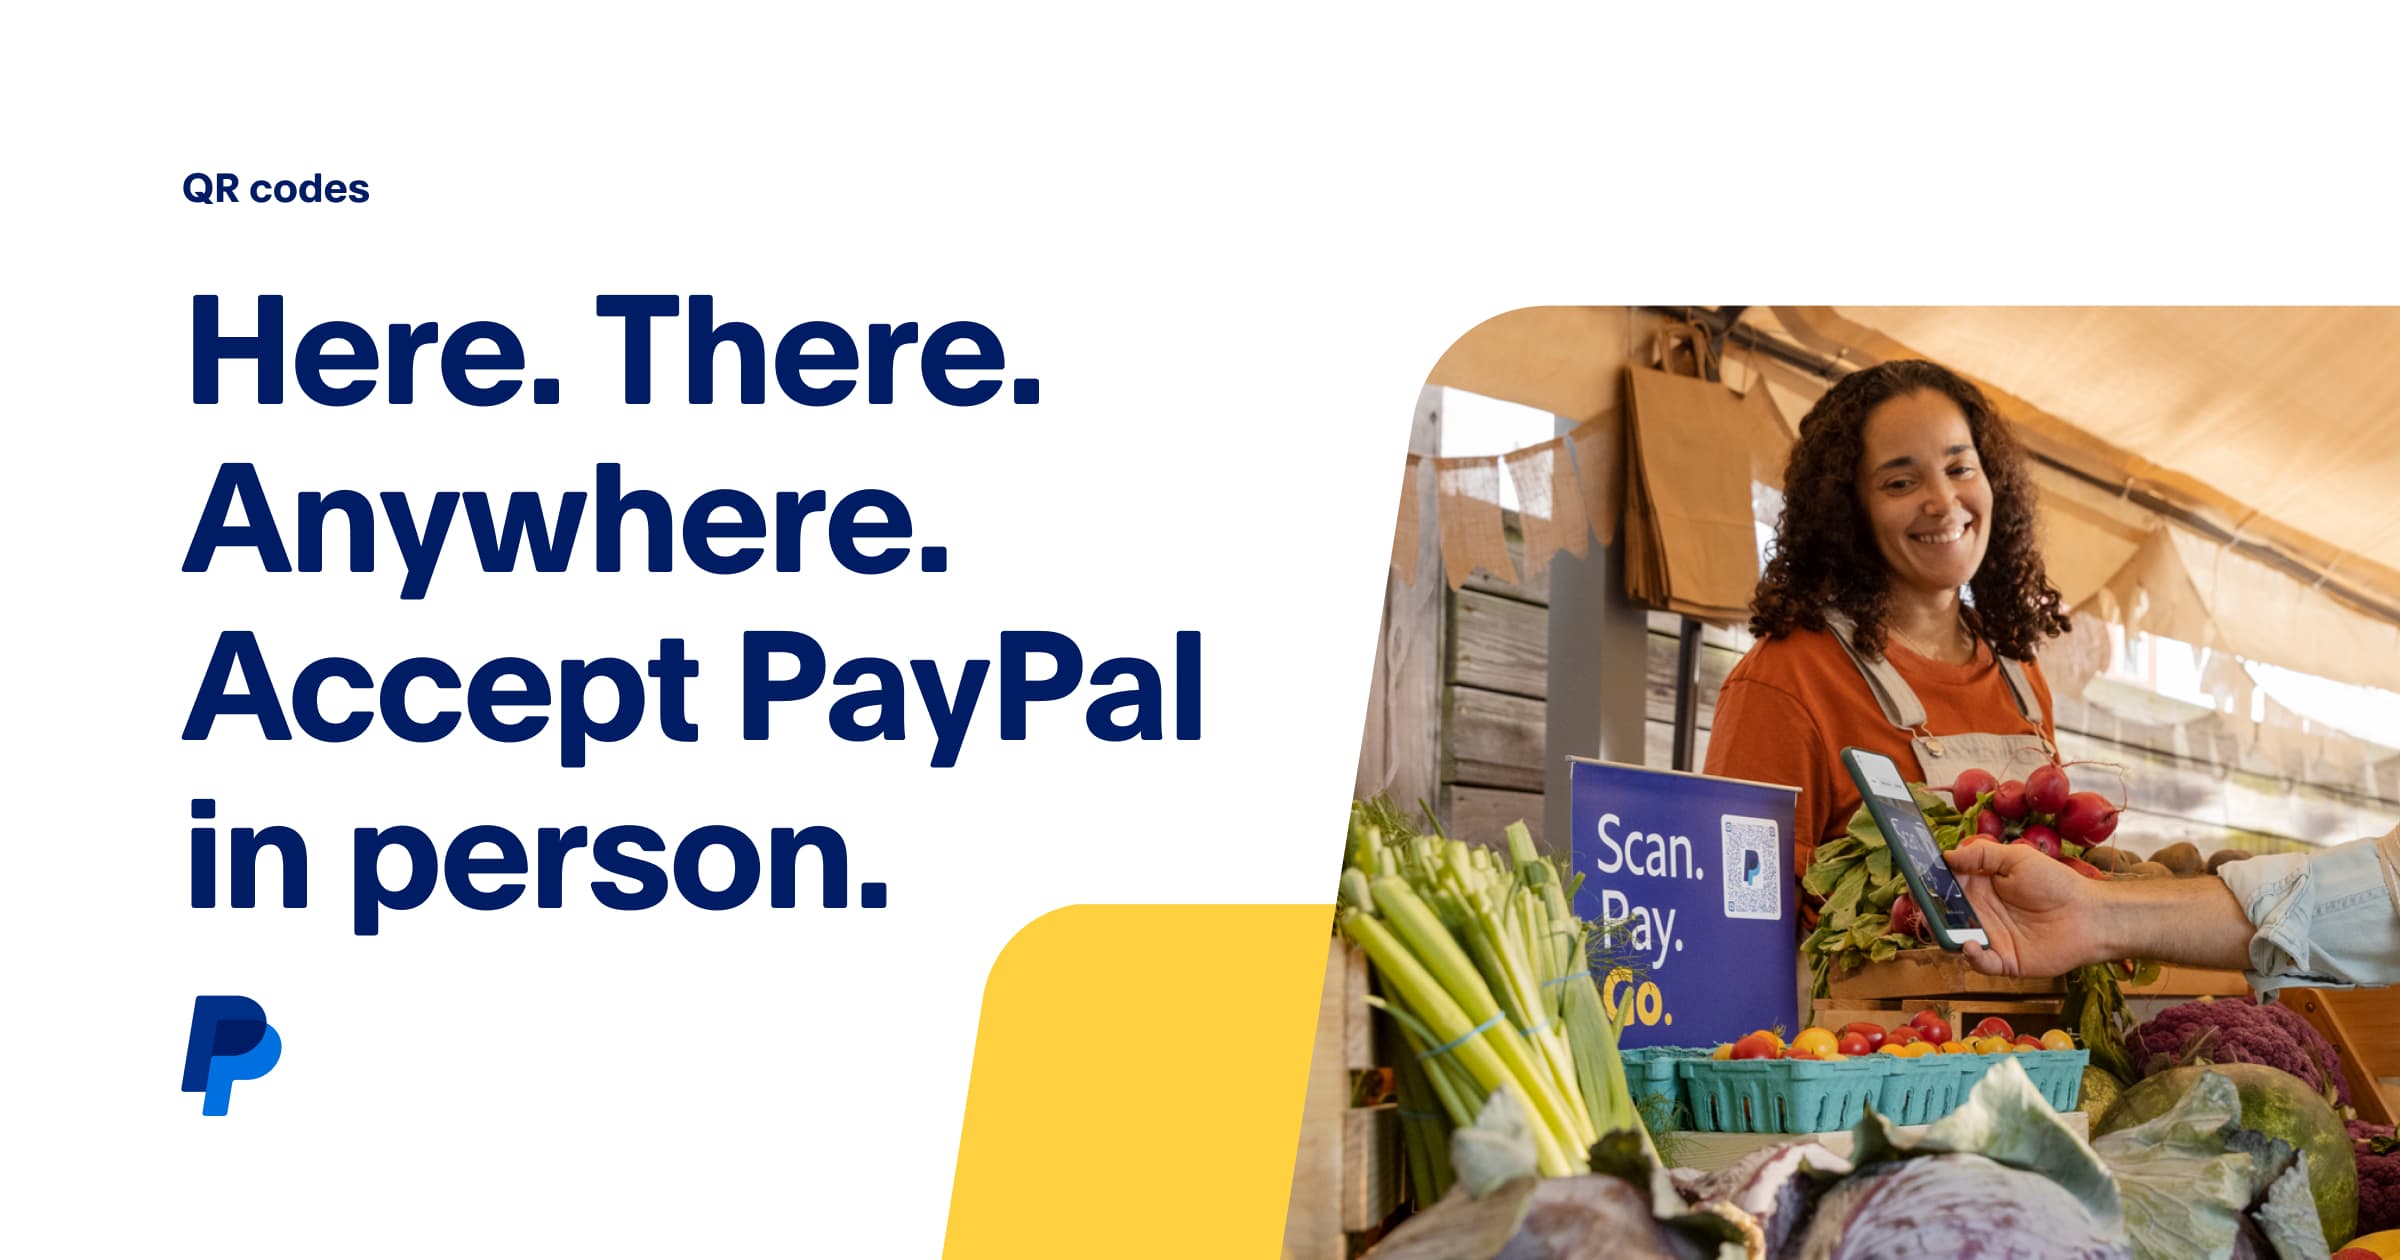 Start Selling Online or In-Person, Get Paid Casually